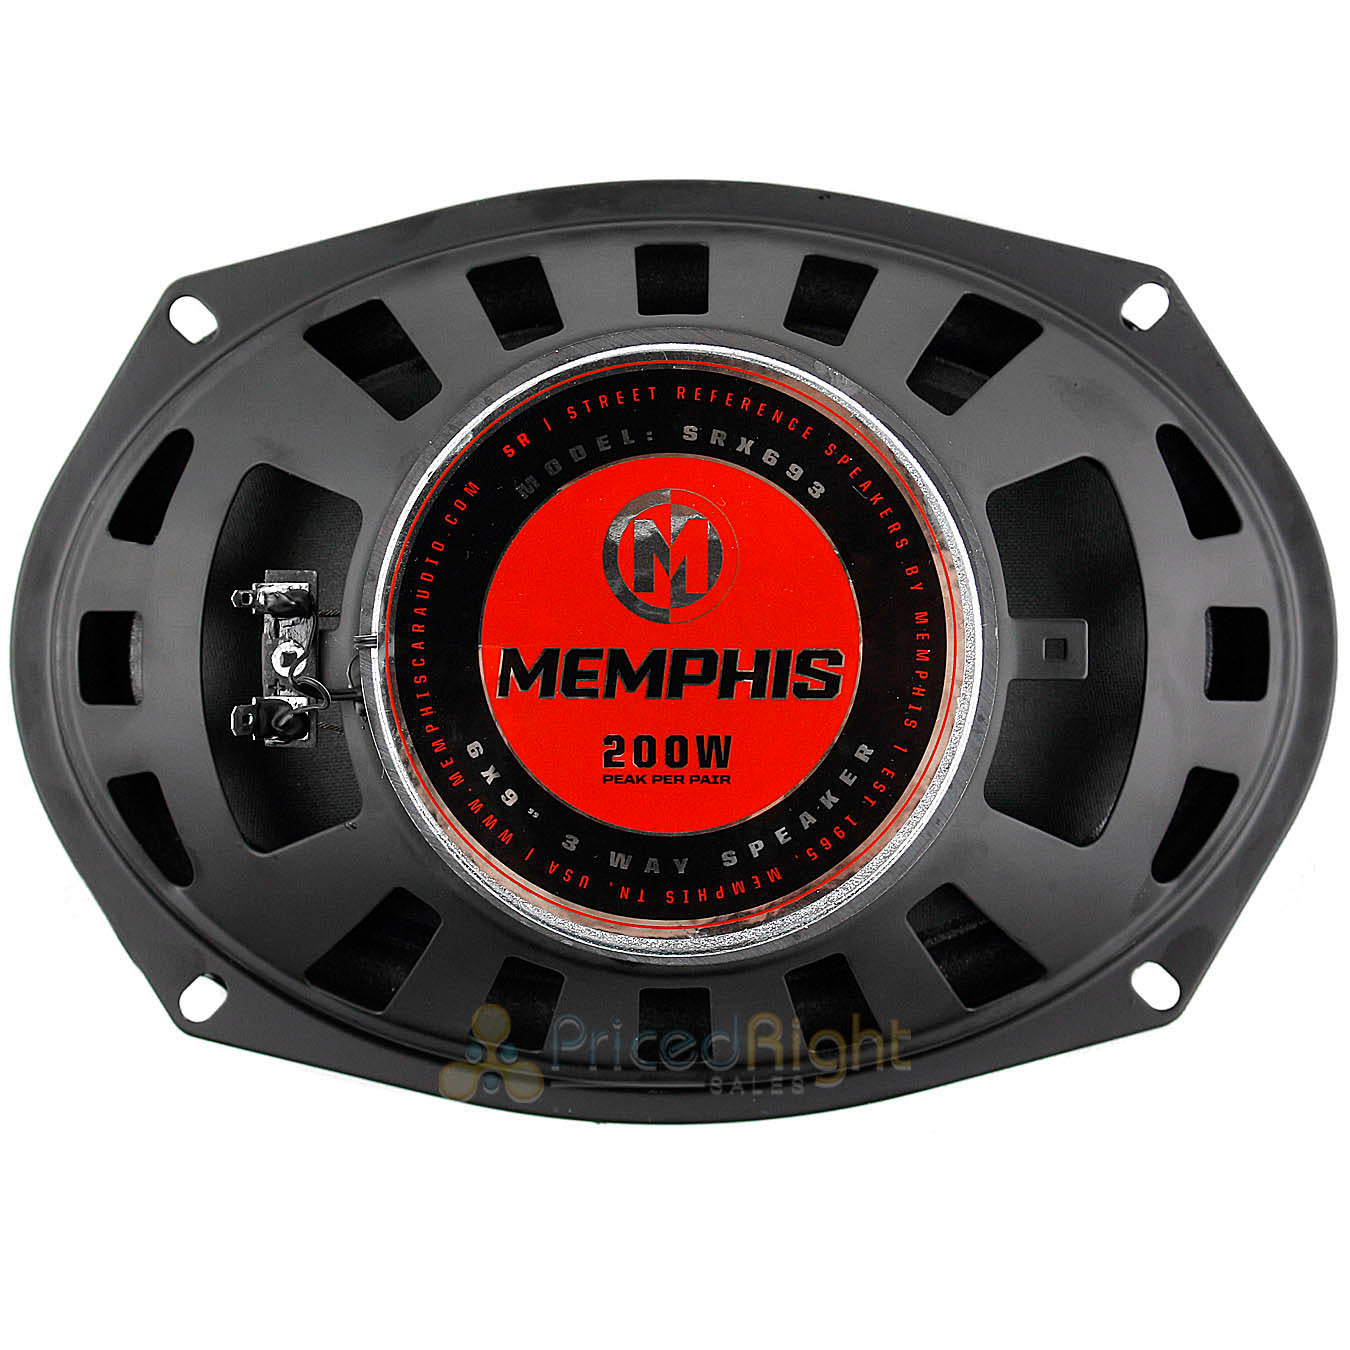 Memphis Audio 6x9" 3 Way Coaxial Speakers Pair 100W Max Street Reference SRX693